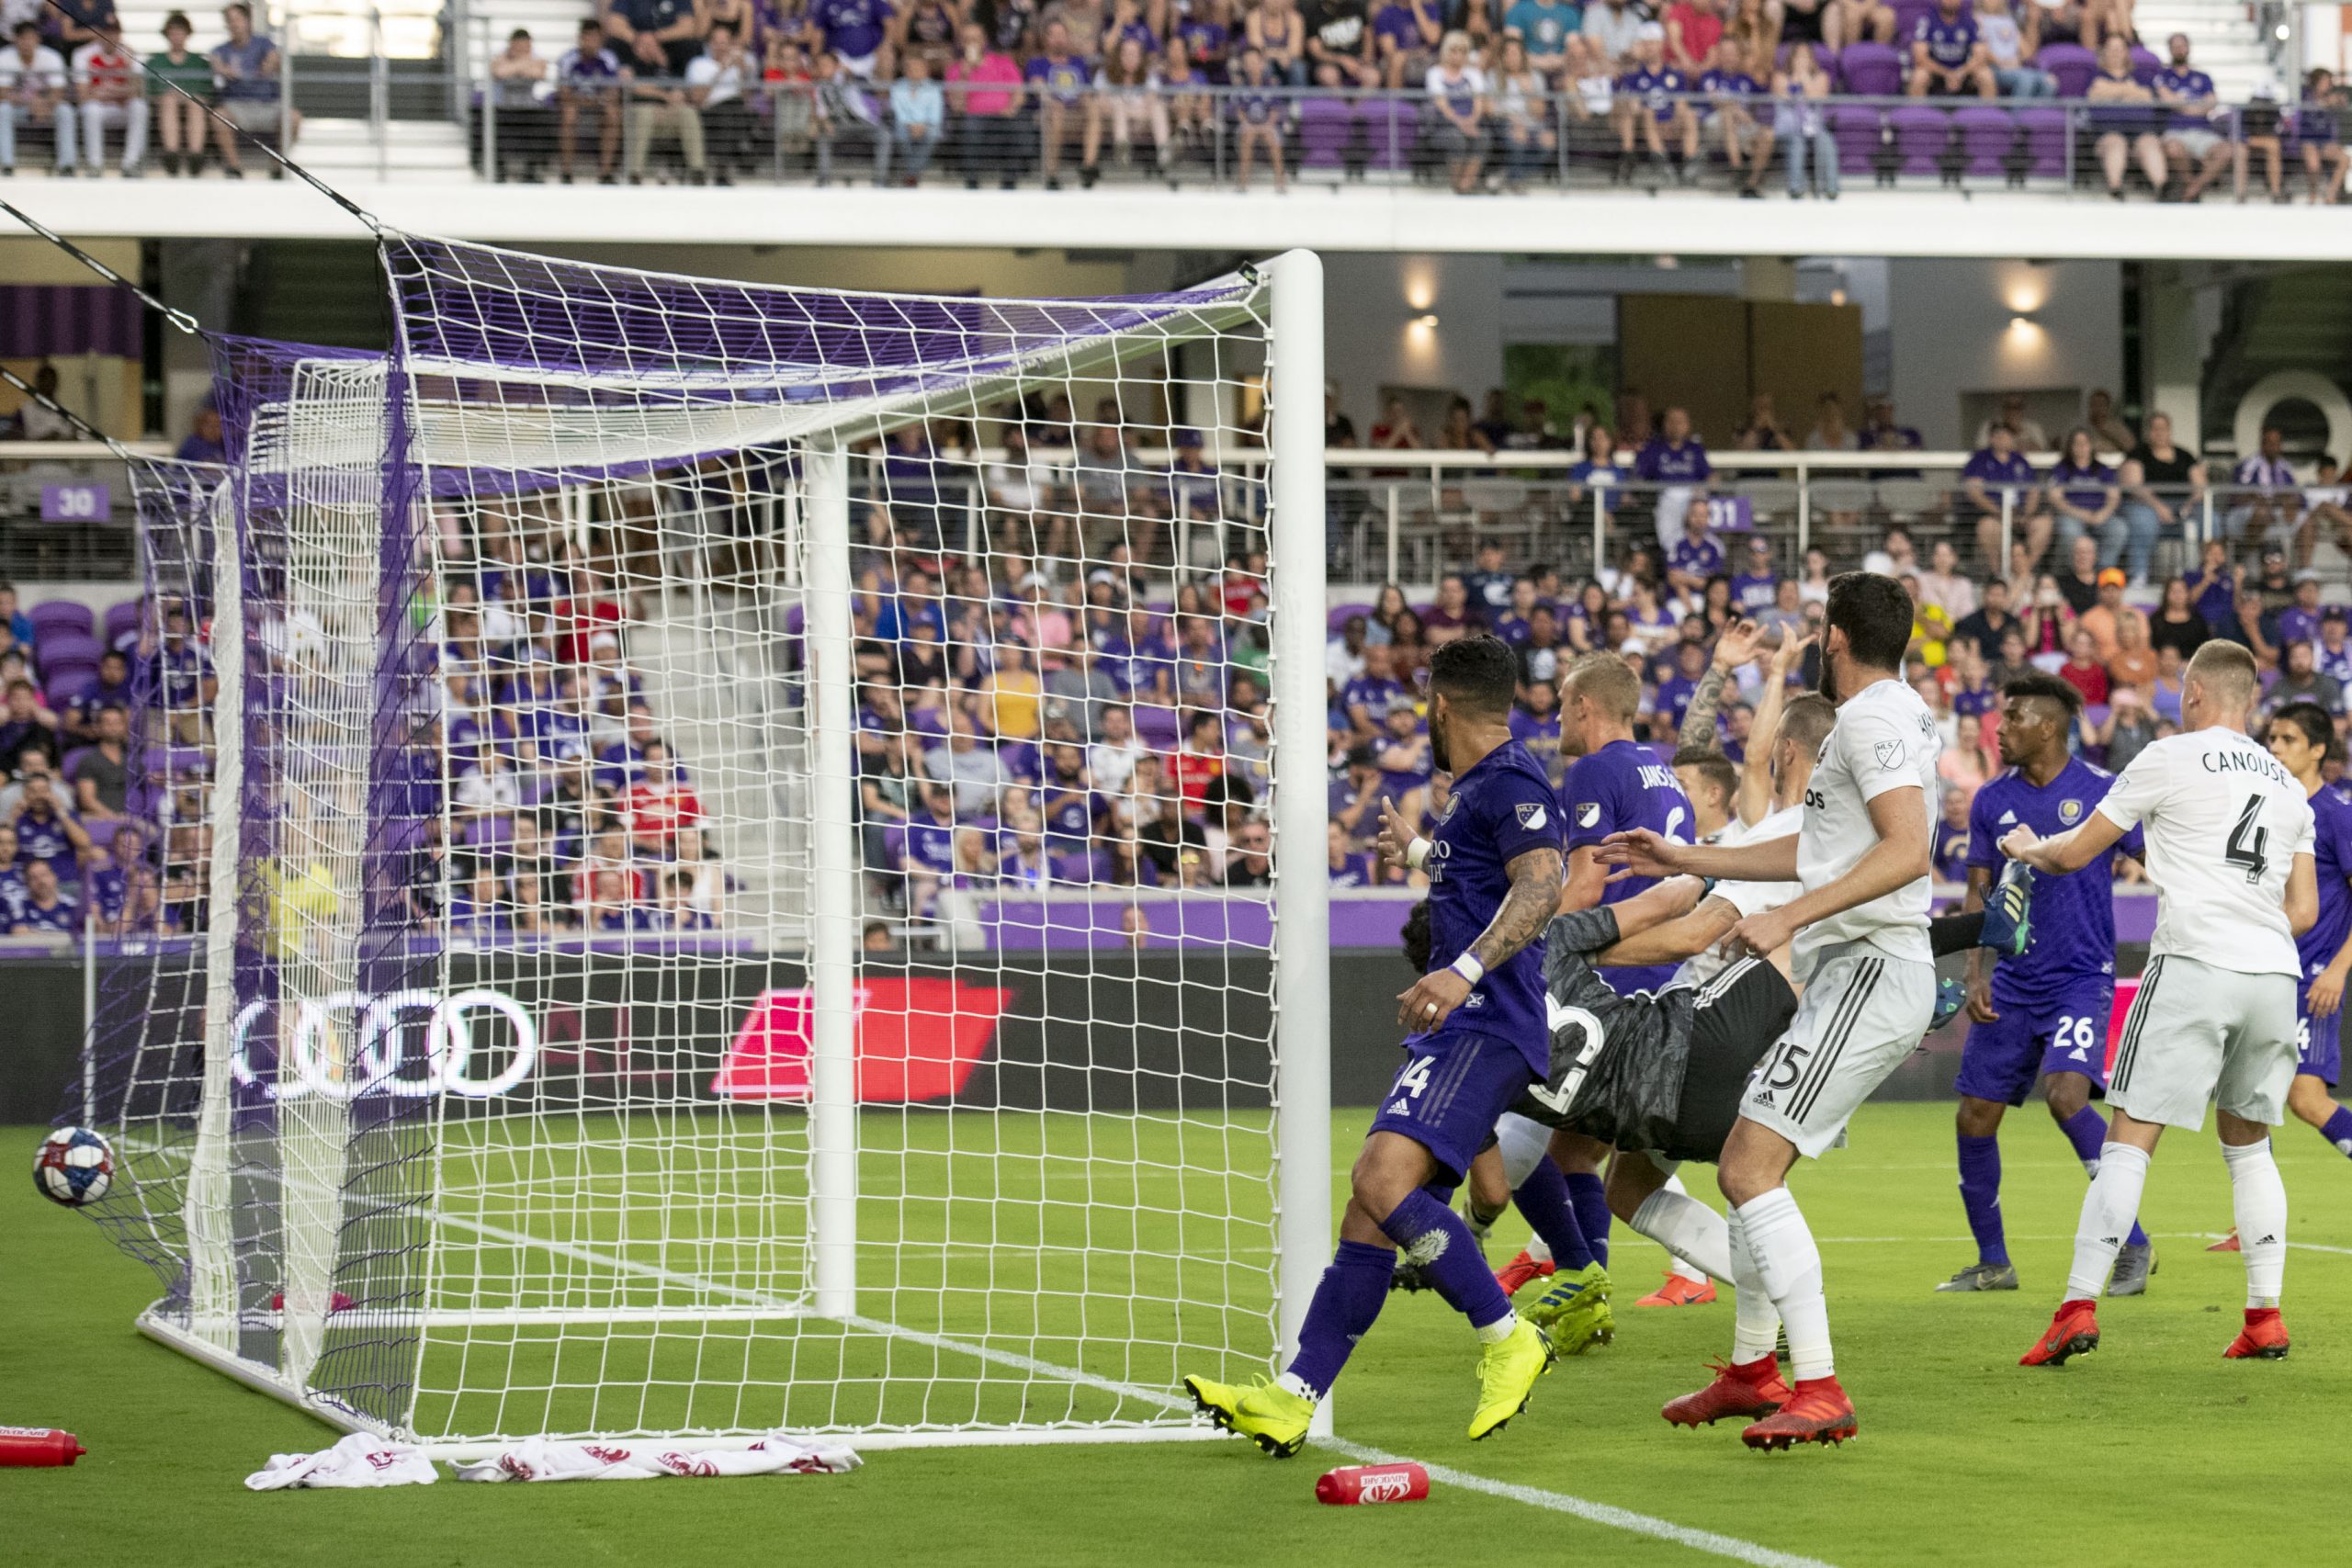 Wayne Rooney scores MLS goal of the year from unreal angle (Video